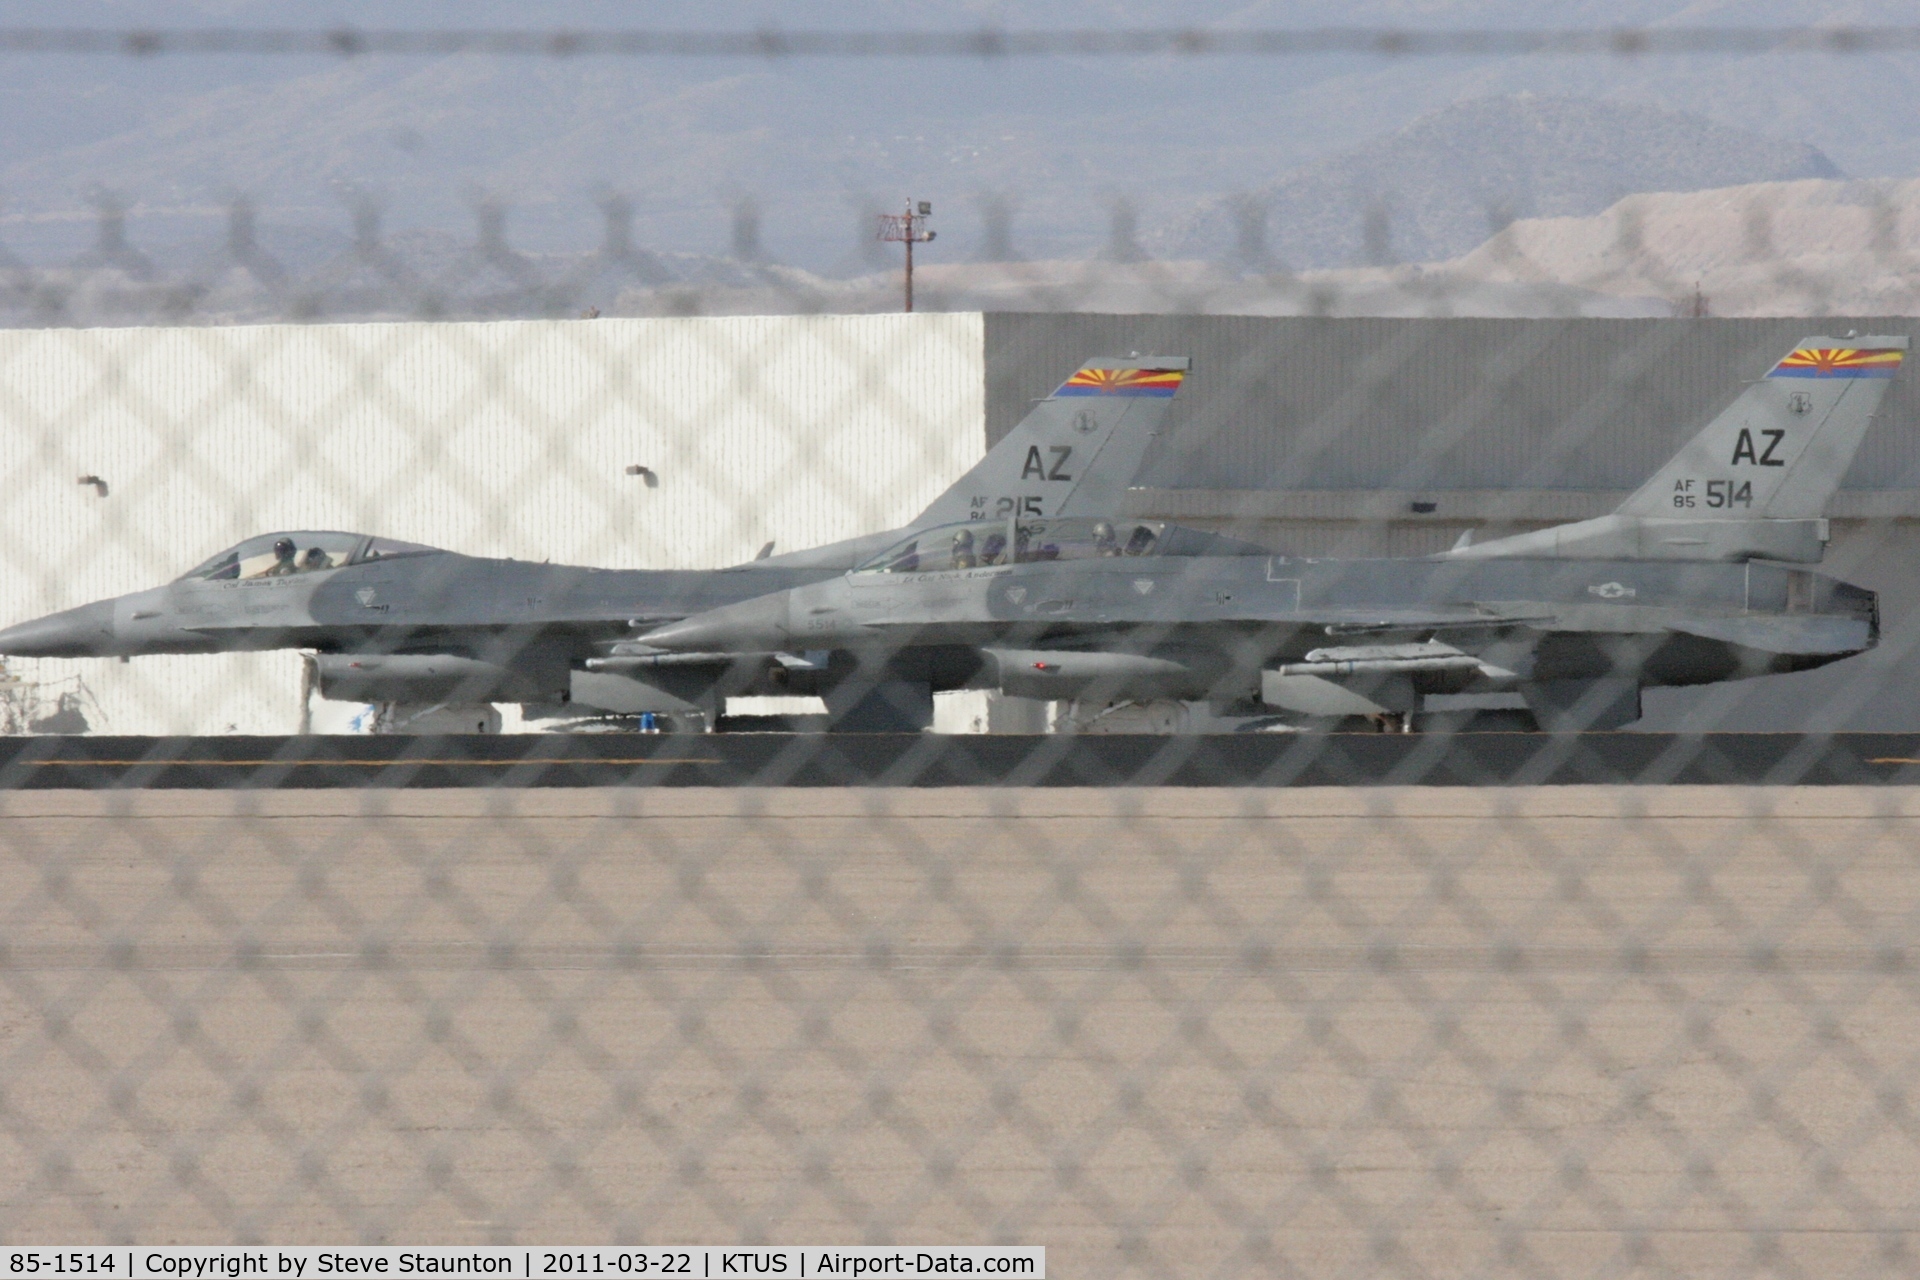 85-1514, General Dynamics F-16D Fighting Falcon C/N 5D-36, Taken at Tucson International Airport, in March 2011 whilst on an Aeroprint Aviation tour